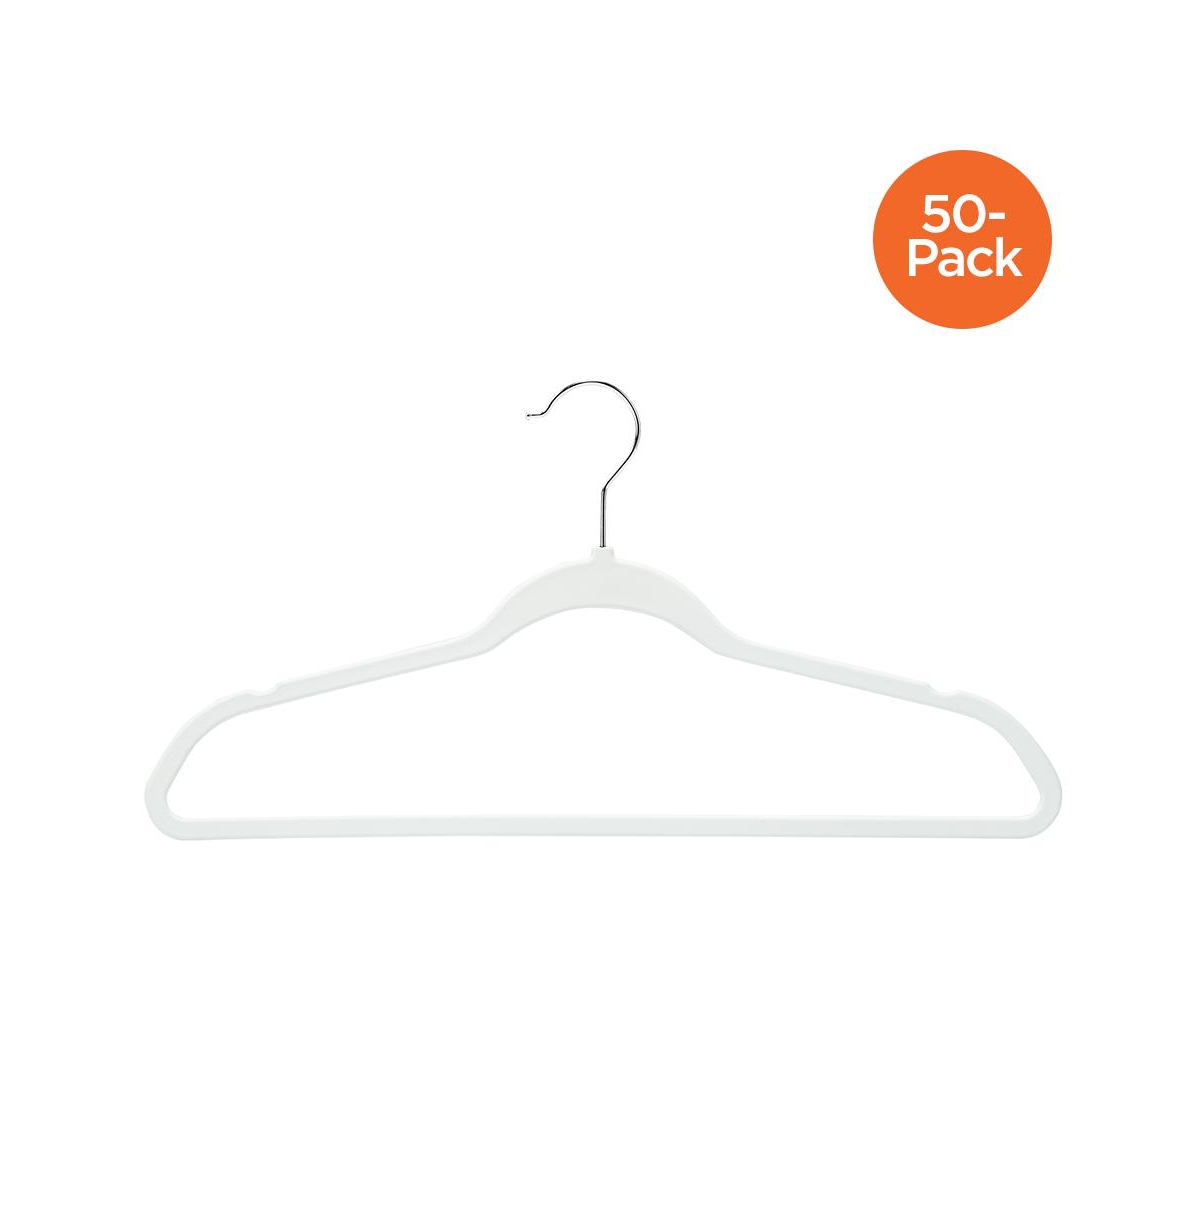 Honey-Can-Do Black Plastic Cascading Collapsible Hangers (20-Pack